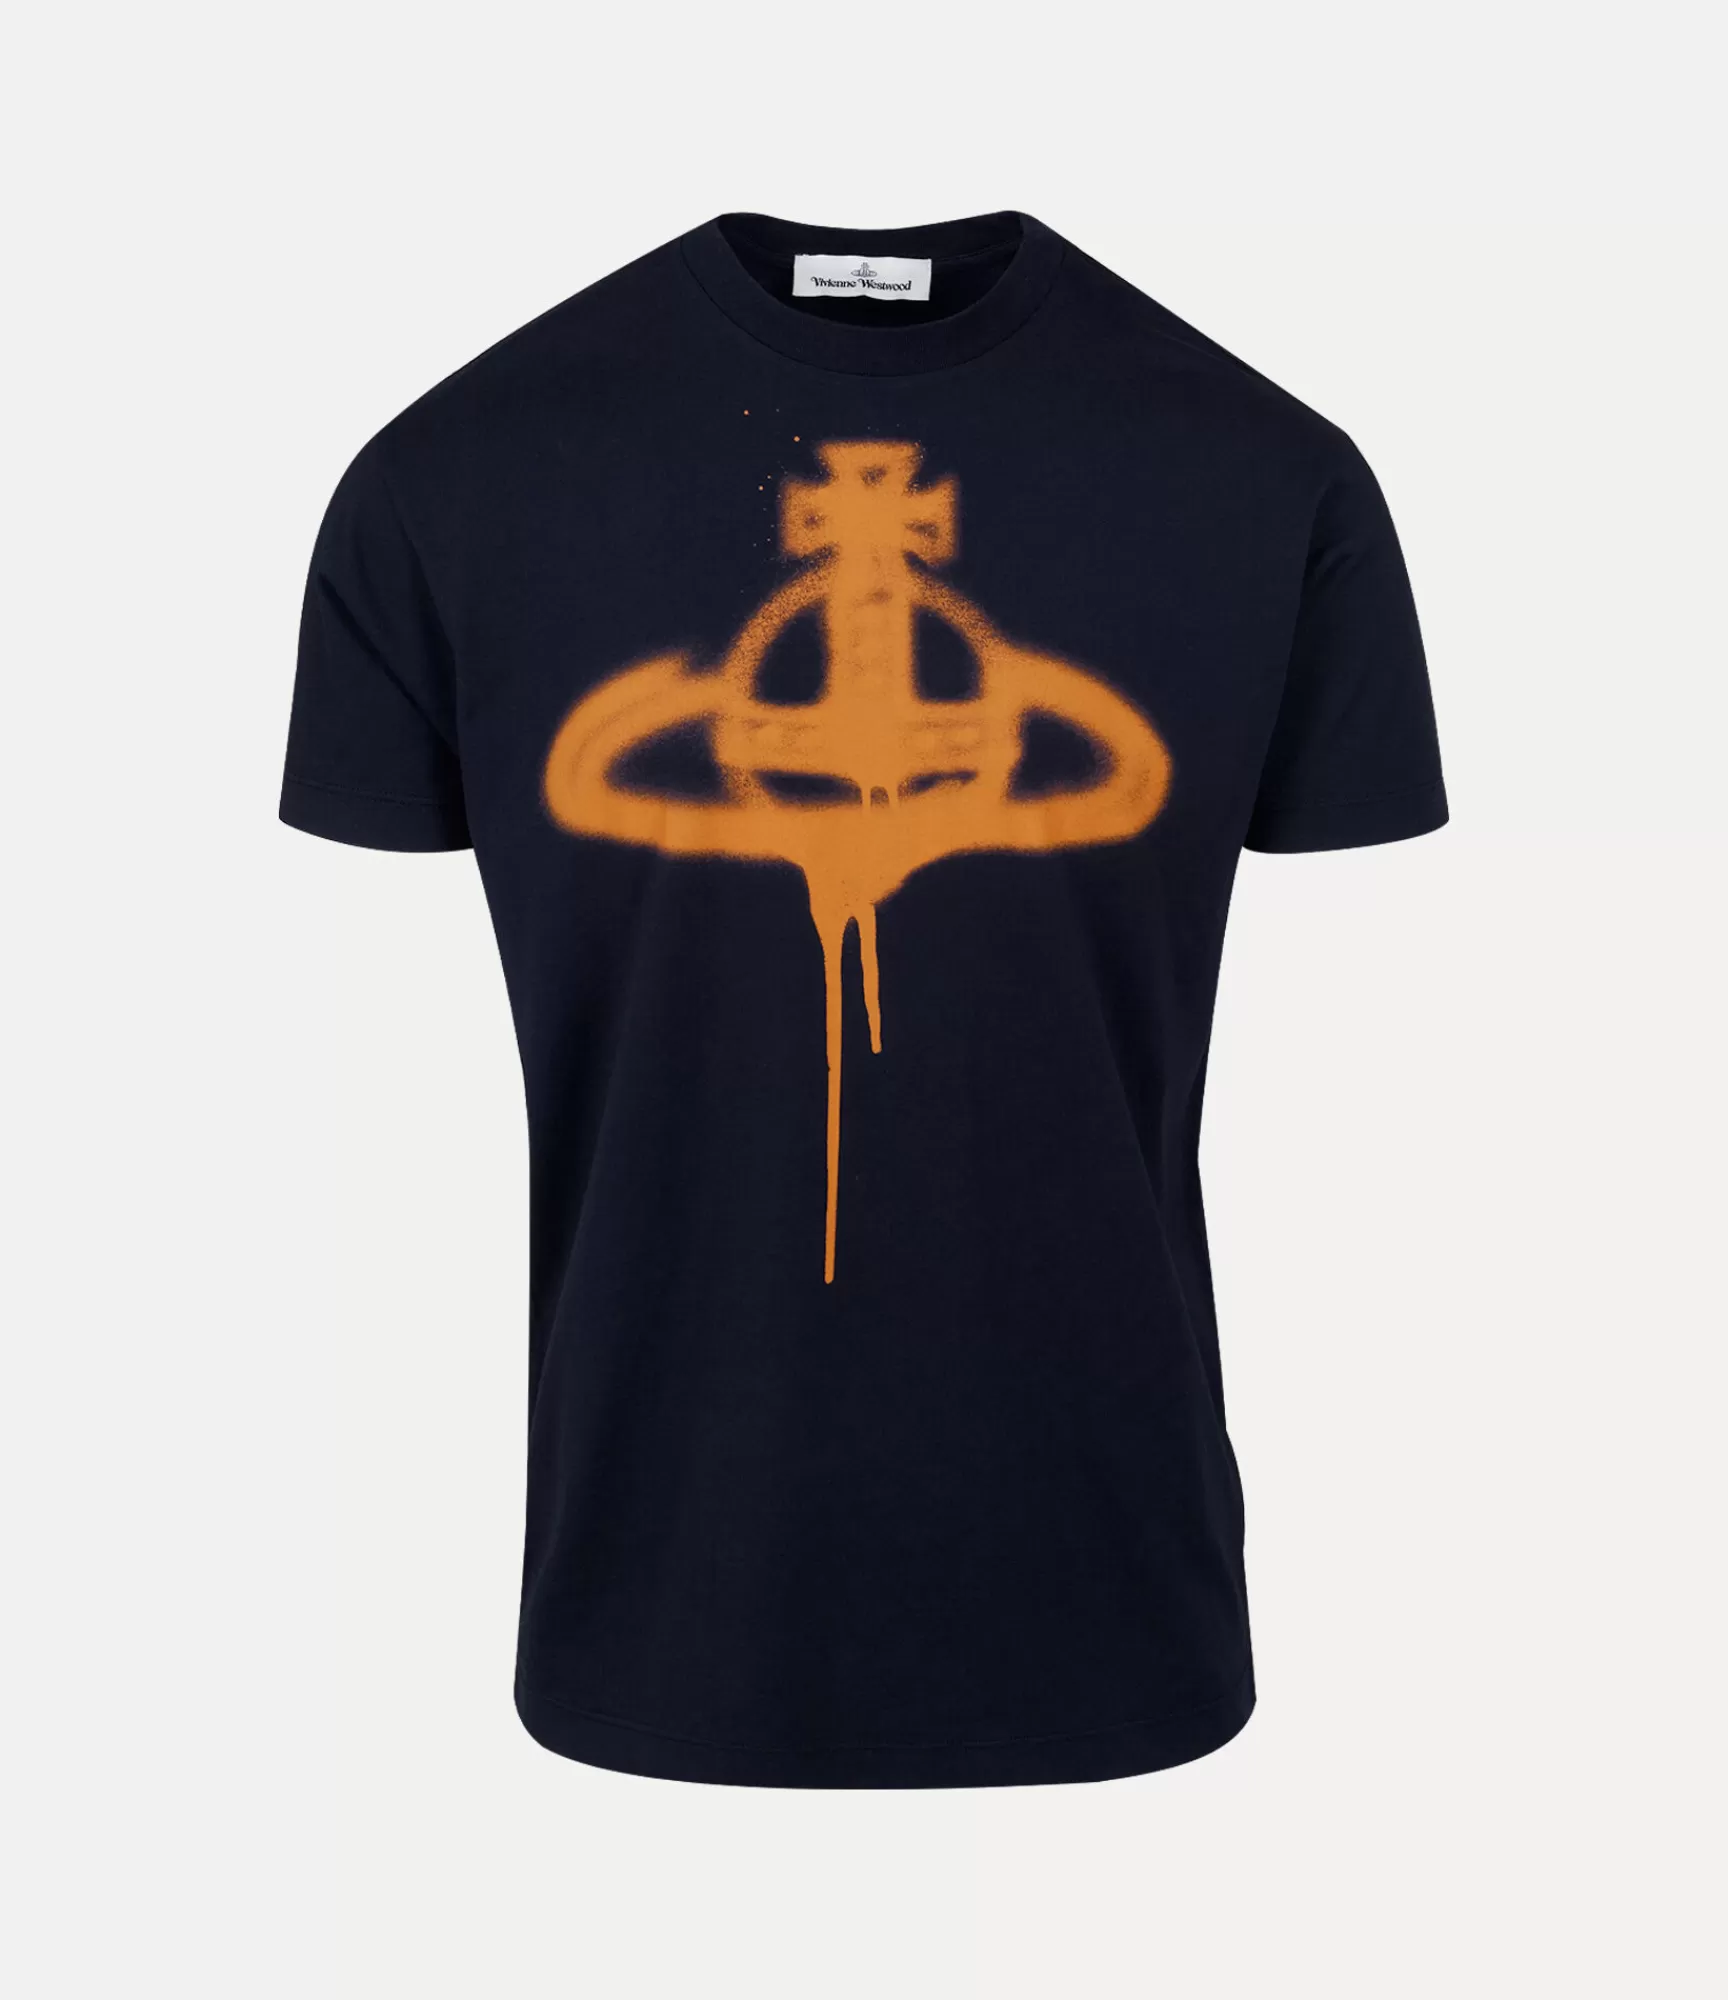 Vivienne Westwood T-Shirts and Polos | Sweatshirts and T-Shirts*SPRAY ORB CLASSIC T-SHIRT Navy